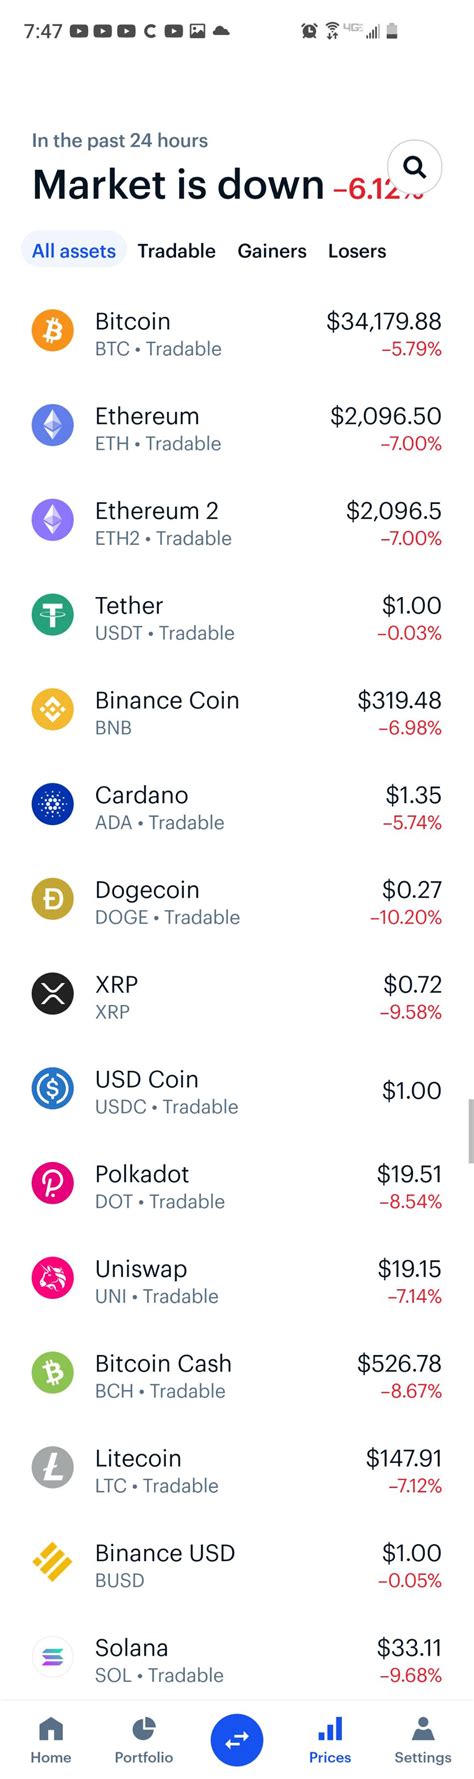 Crypto market experienced a $27 billion drop in valuation overnight, experts explain factors and after some real quiet period, lowest volatility, almost in bitcoin history, all of the sudden today the crypto market still looking weak at this point. Please realize the whole market is down today before ...